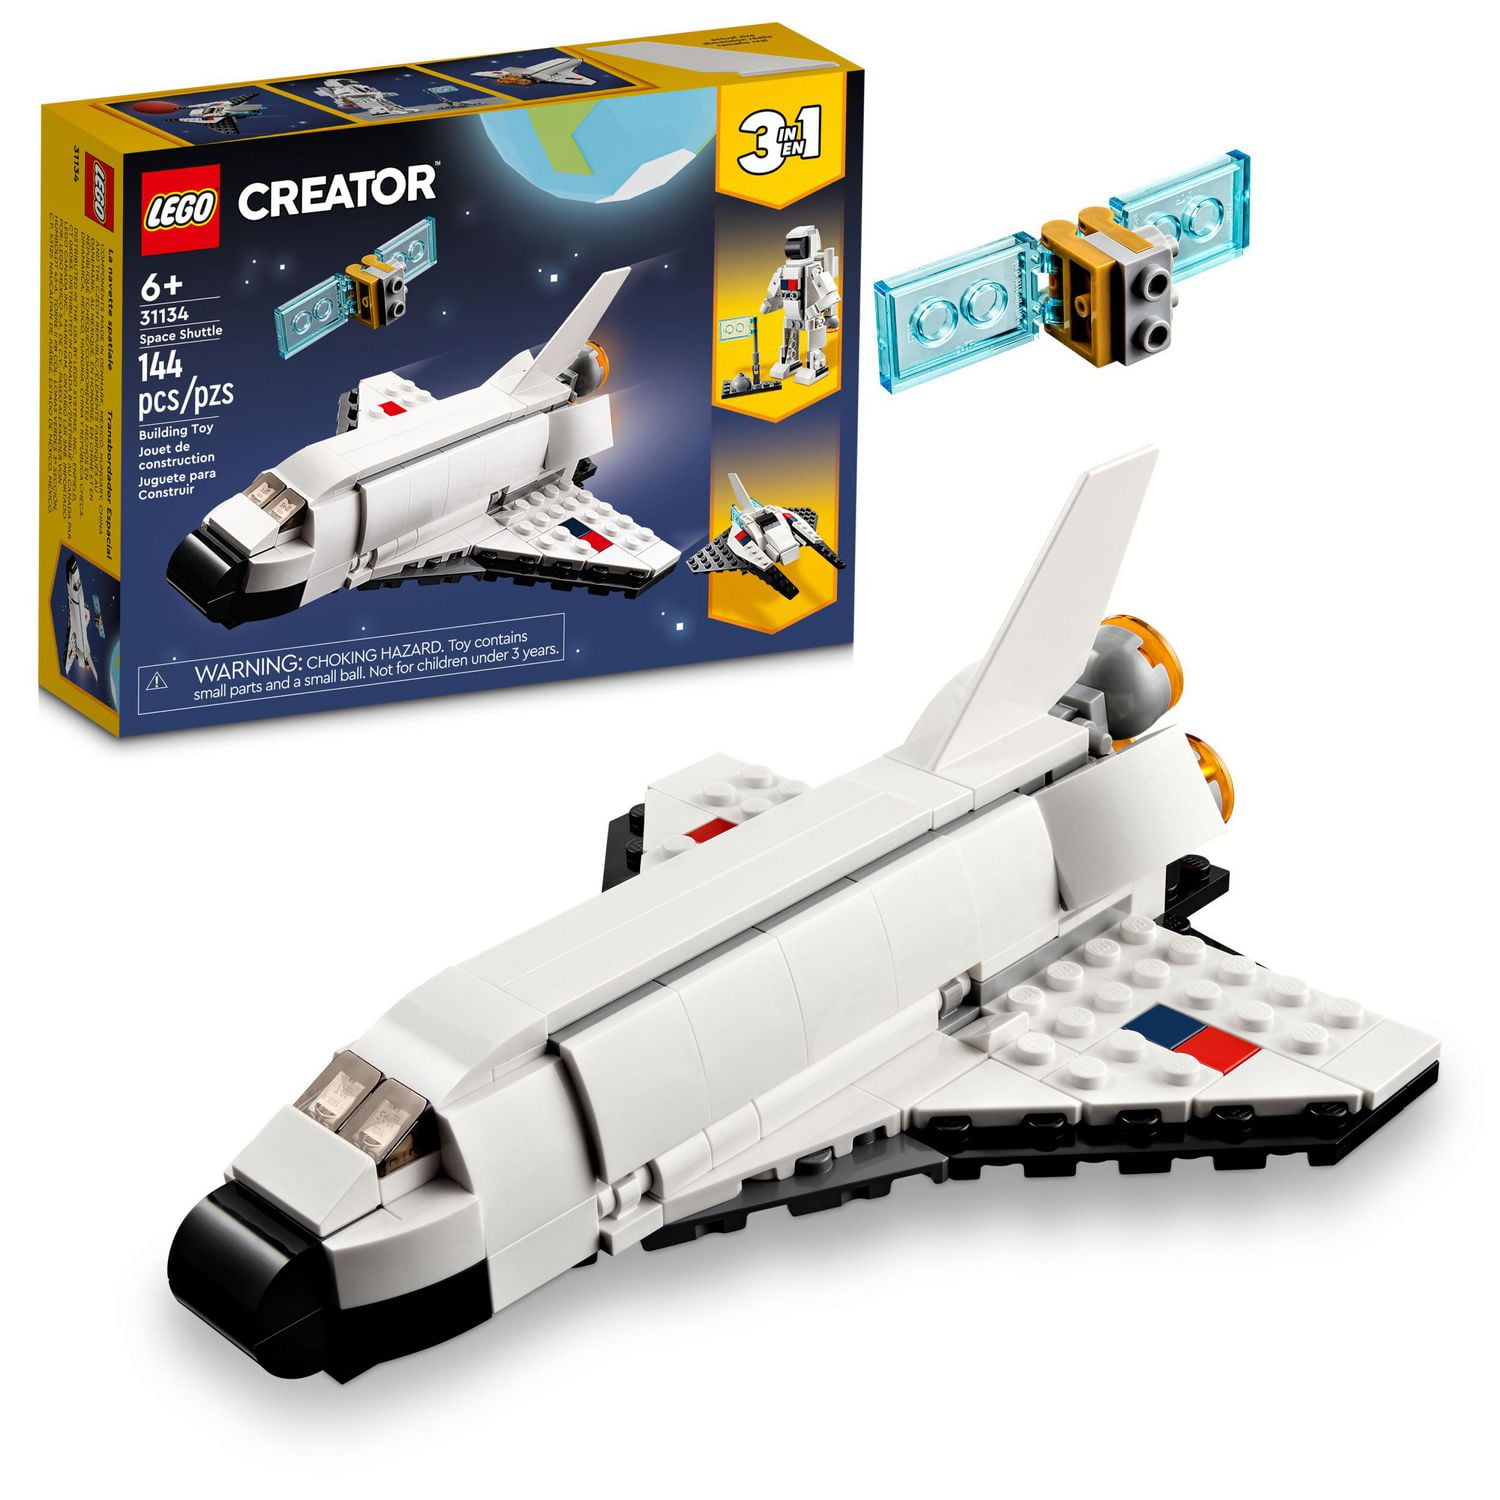 LEGO Creator 3 in 1 Space Shuttle Toy to Astronaut Figure to Spaceship  31134, Building Toys for Kids, Boys, Girls ages 6 and up, Creative Gift  Idea, Includes 144 Pieces, Ages 6+ 